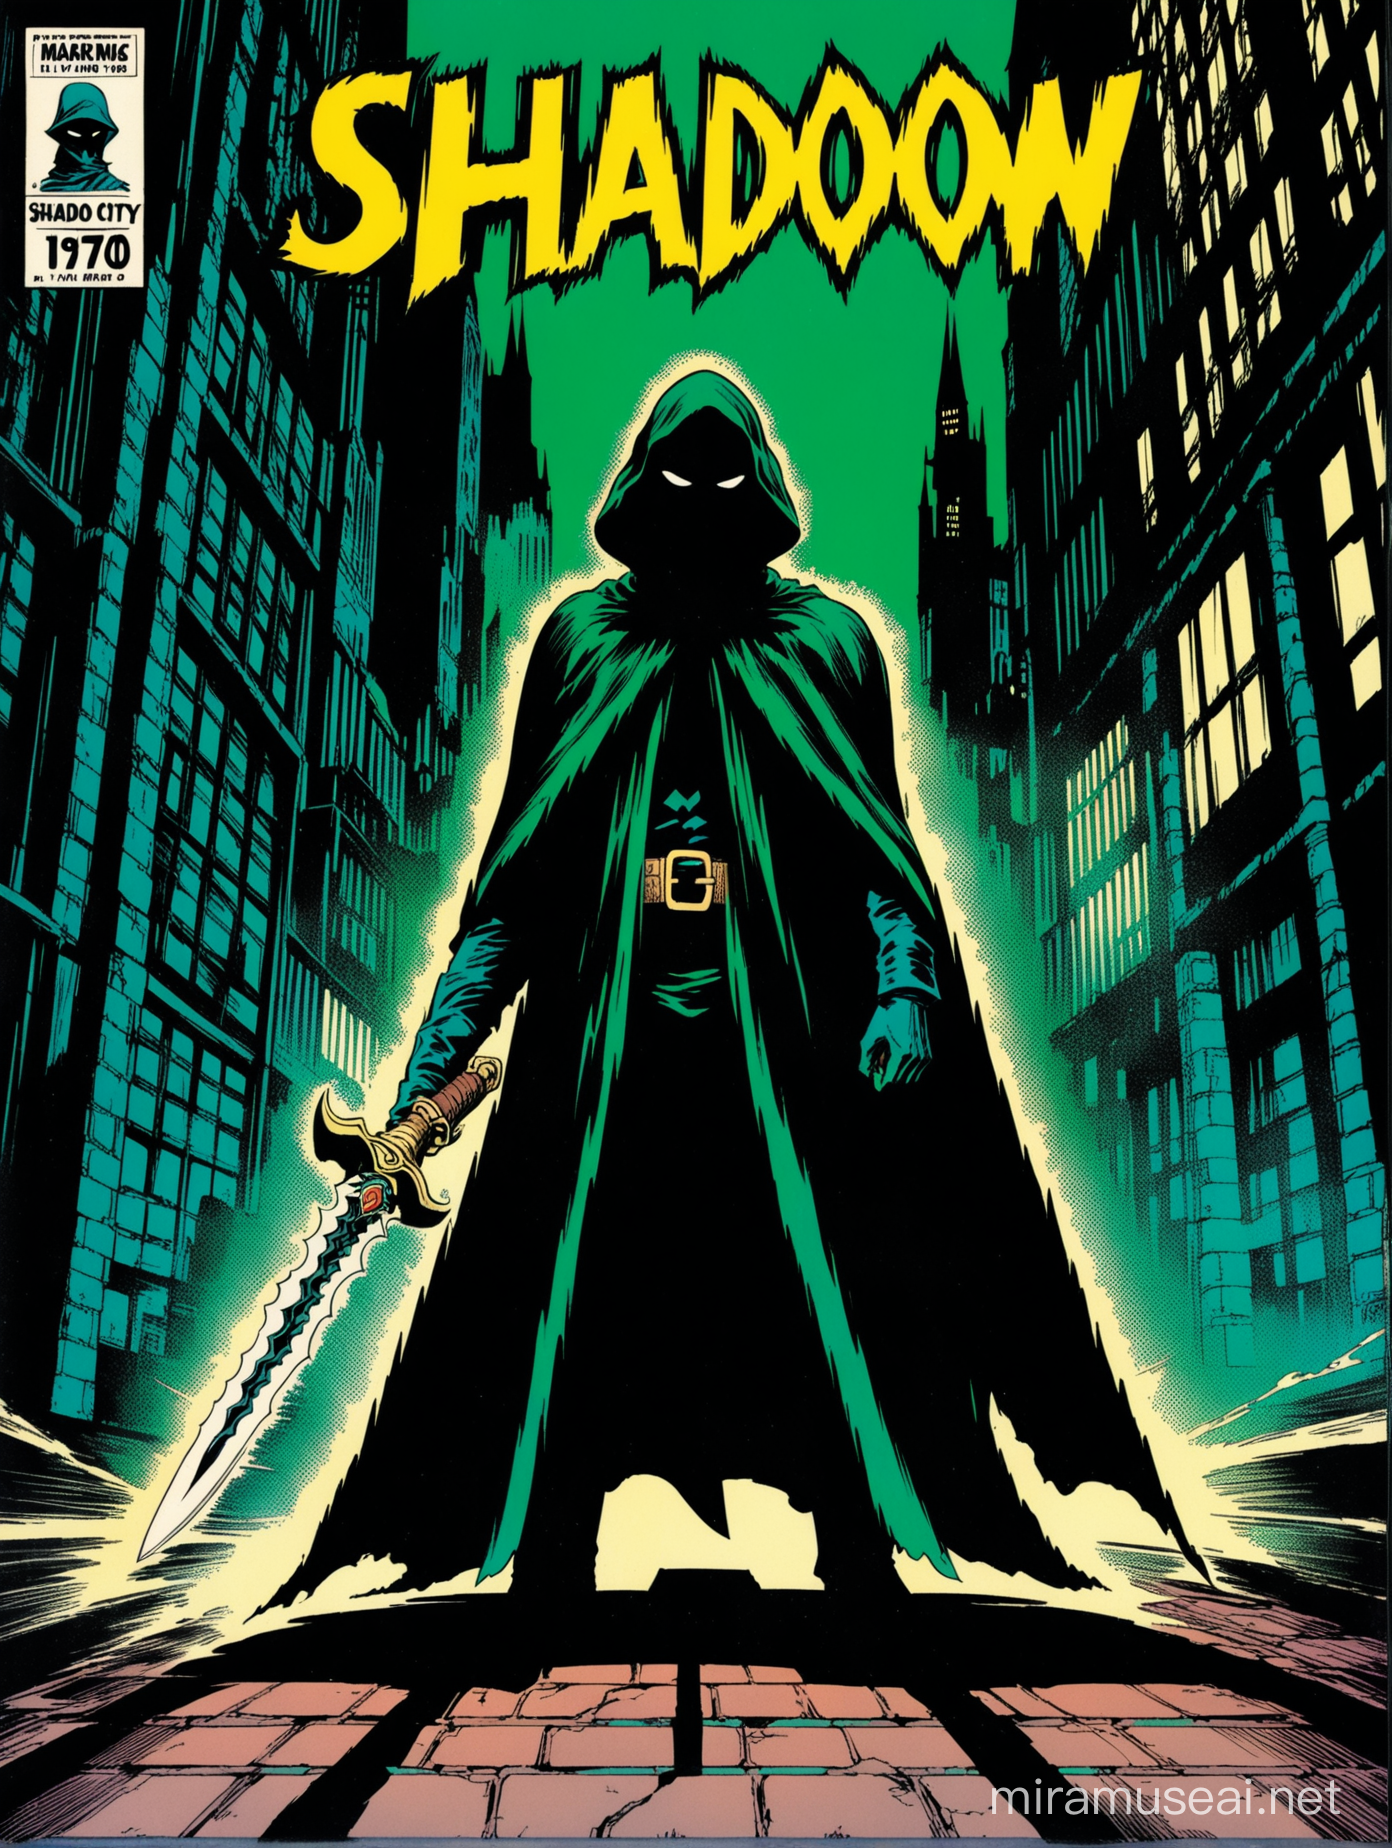 Mysterious Cloaked Figure with Dagger in Dark City Scene Retro 1970s Comic Book Cover Style